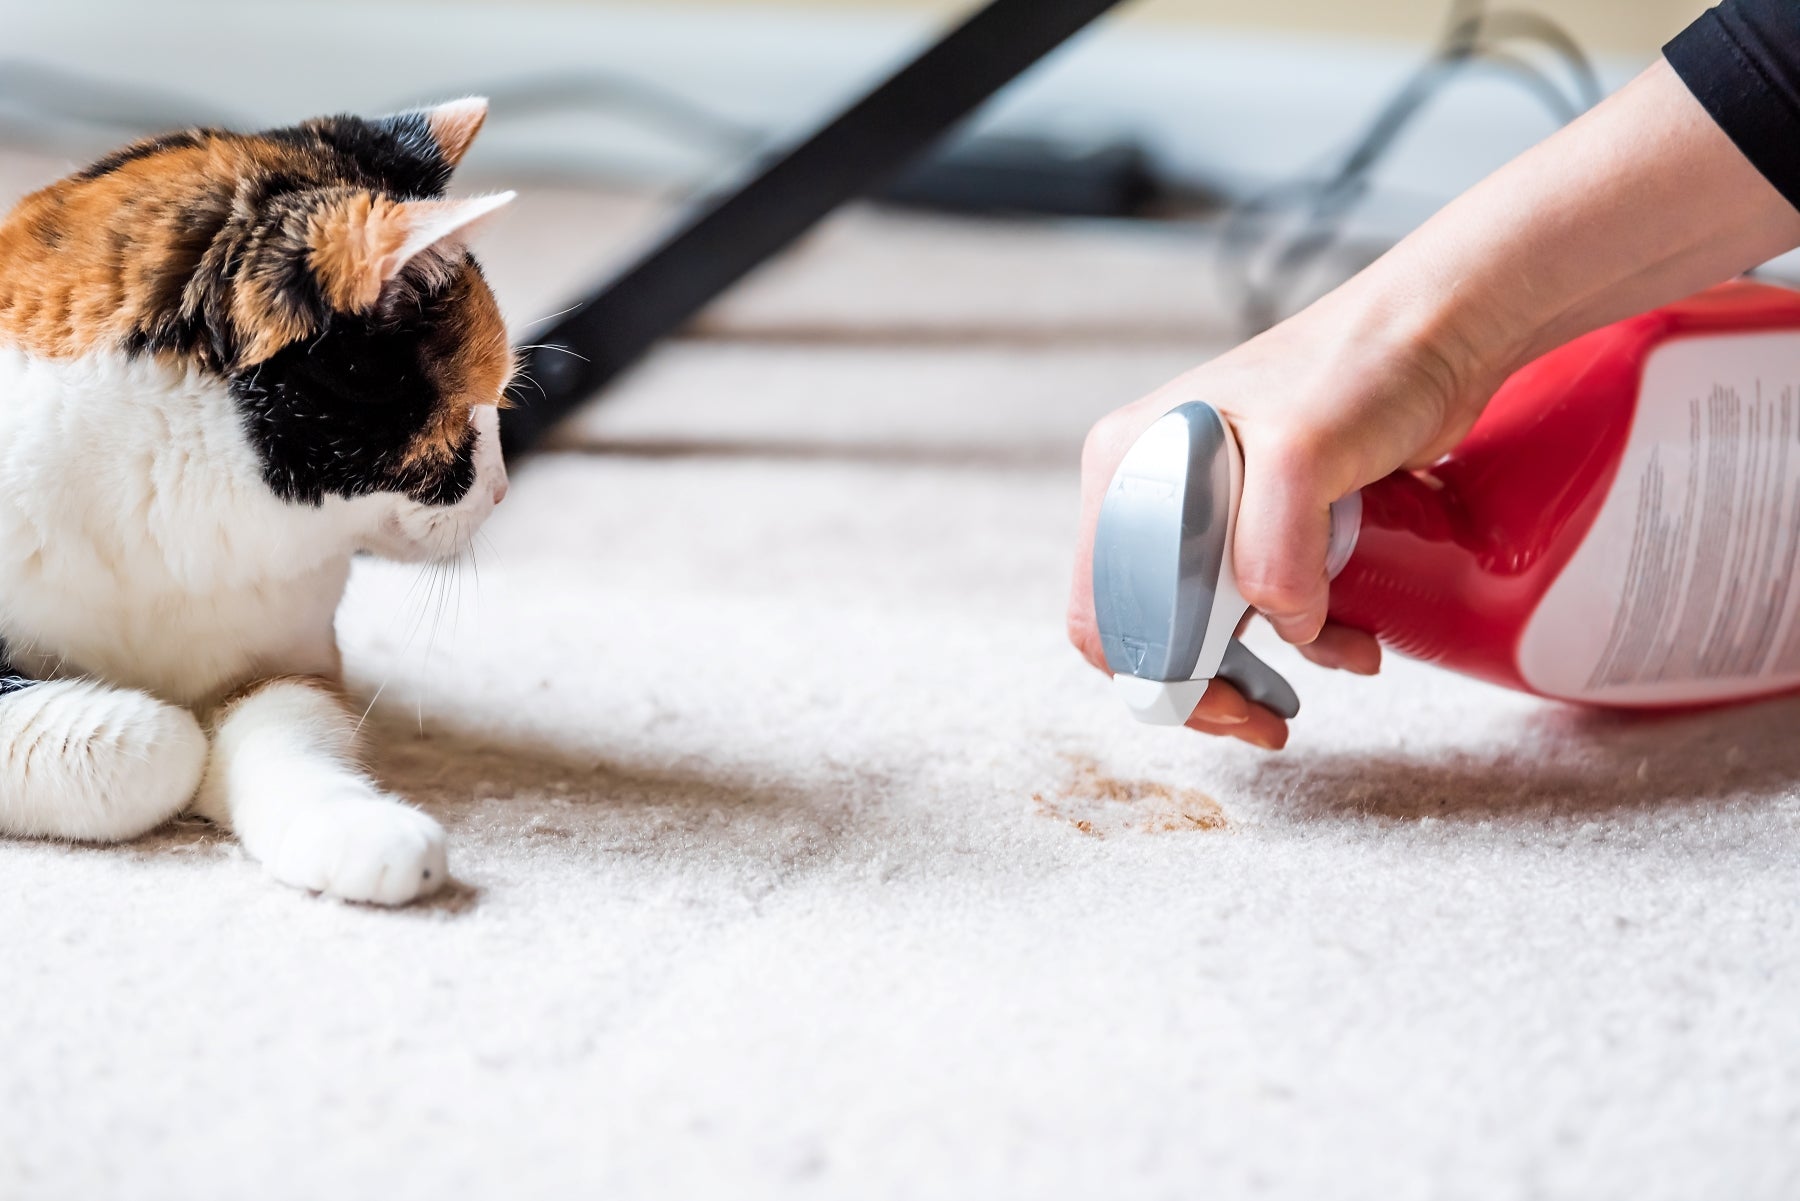 How to Get Pet Poop Stains Out of Carpet